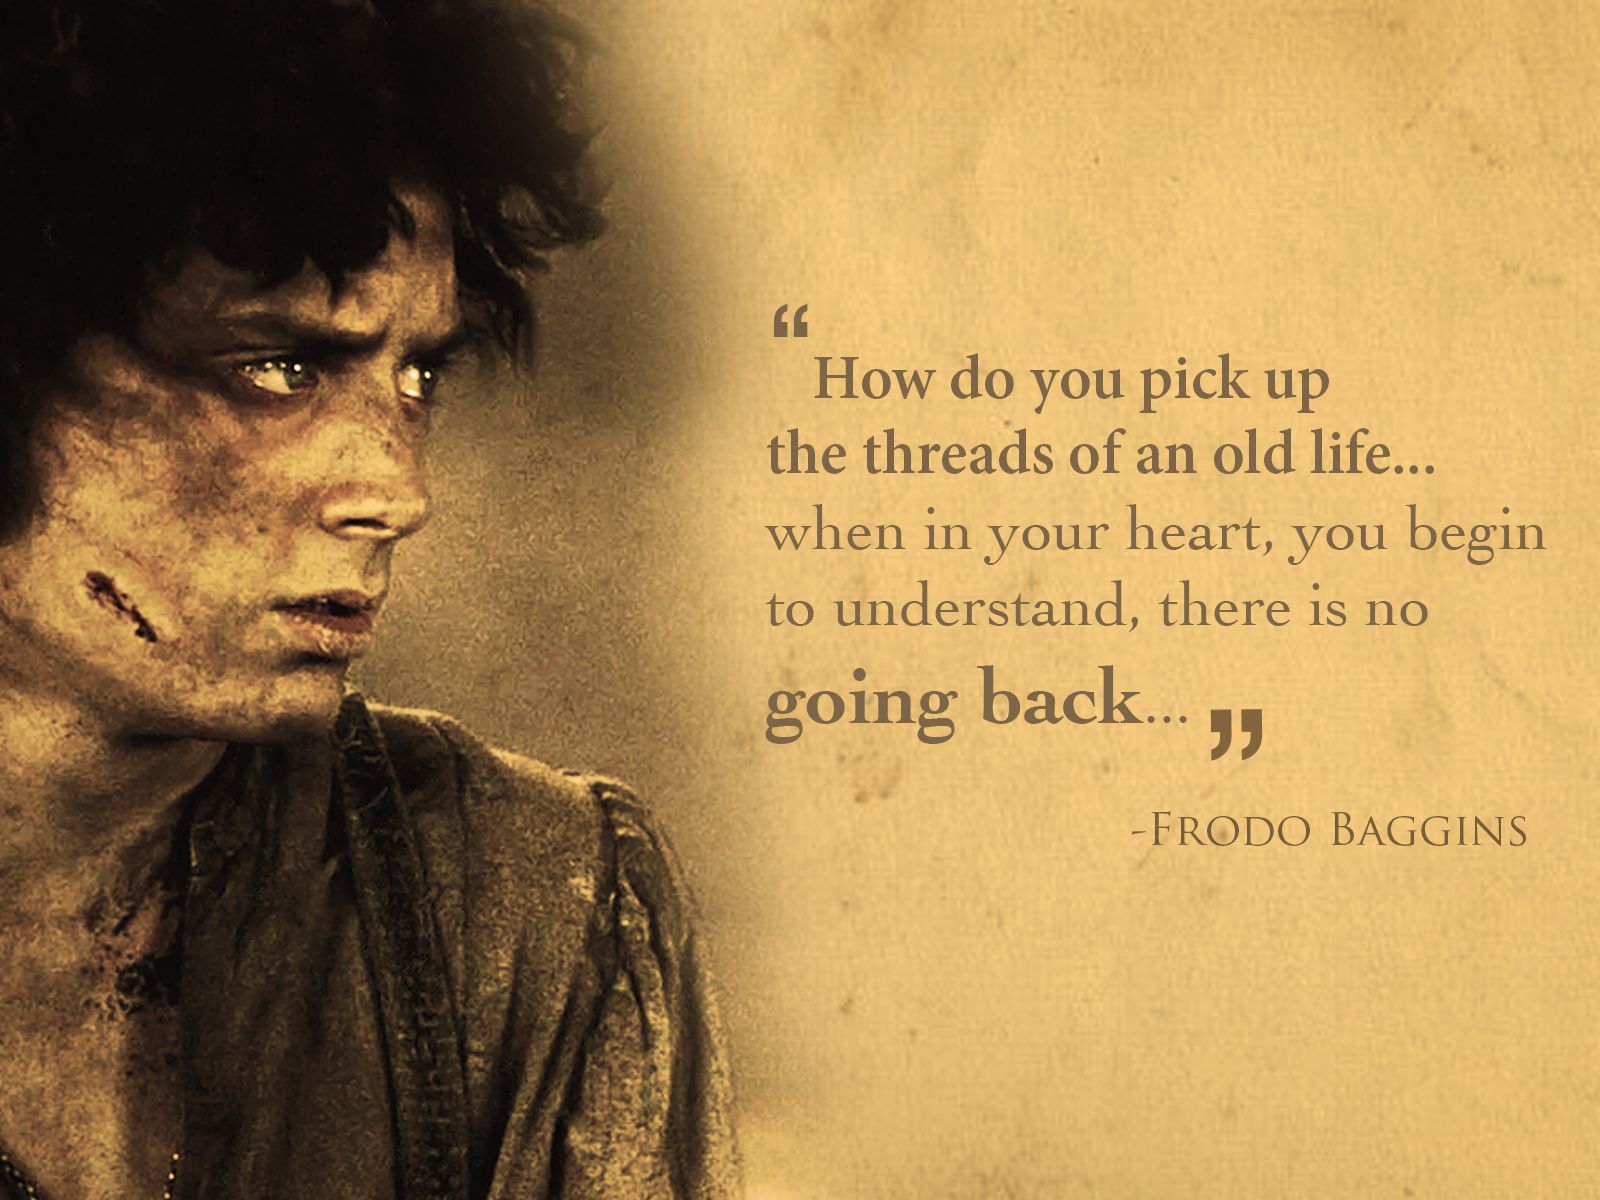 frodo tribute wallpaper. Lotr quotes, Lord of the rings, Tolkien quotes